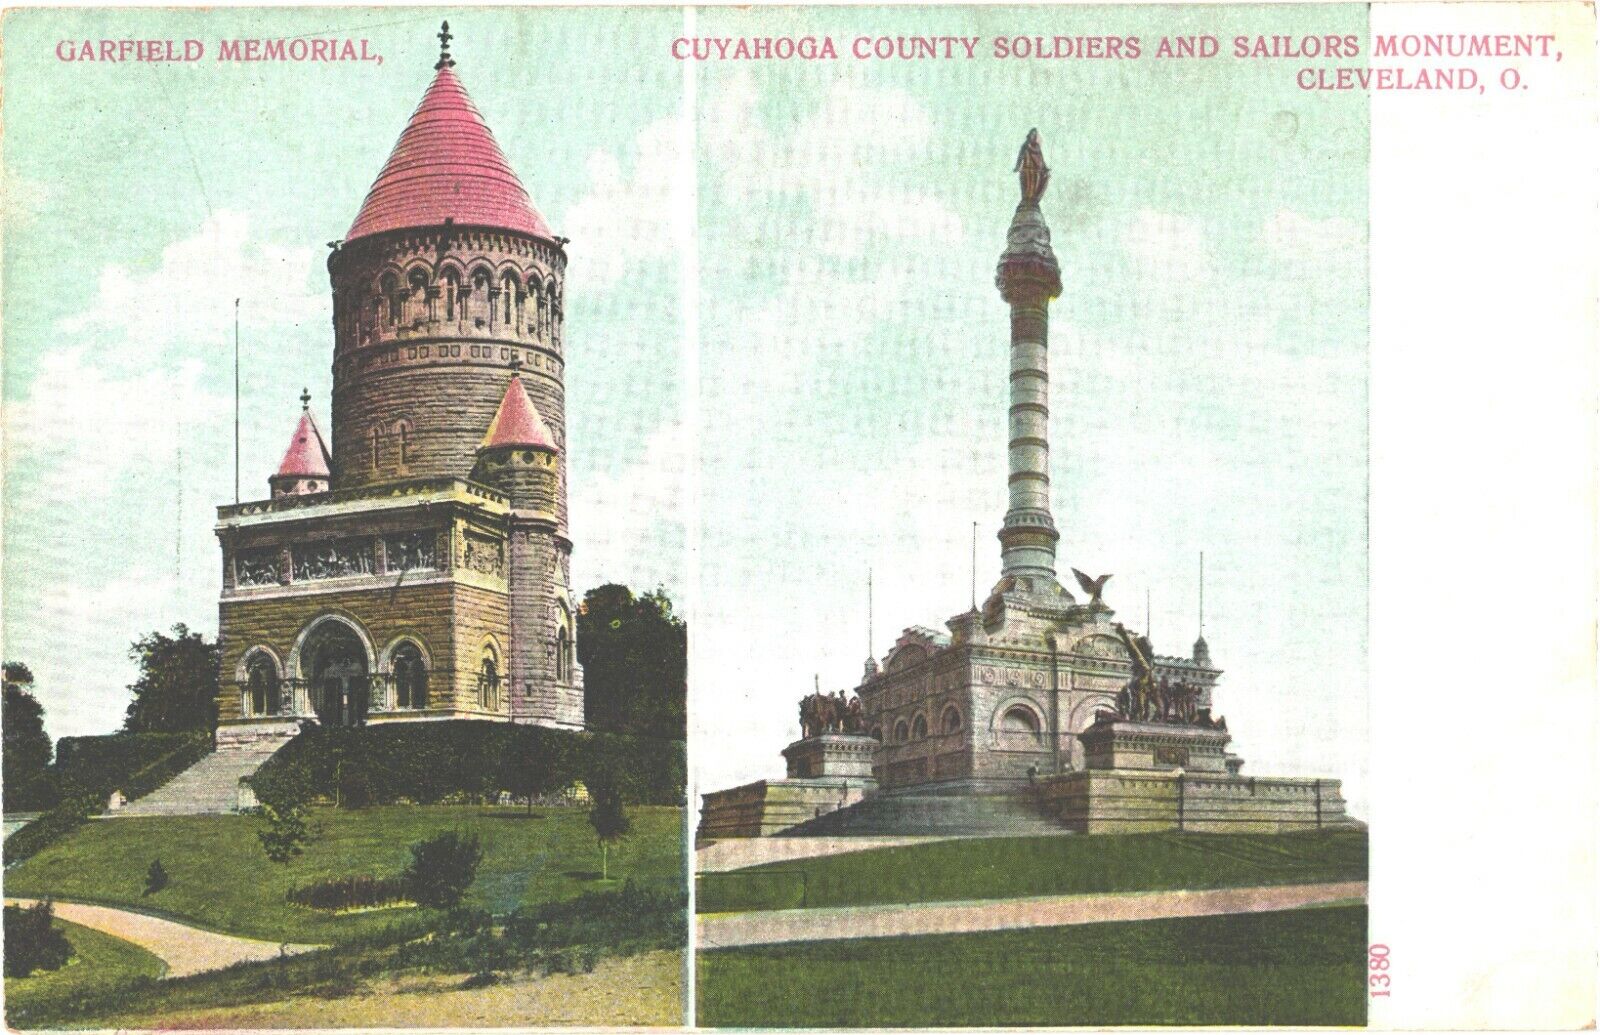 Garfield Memorial, Cuyahoga County Soldiers Sailors Monument Cleveland Postcard